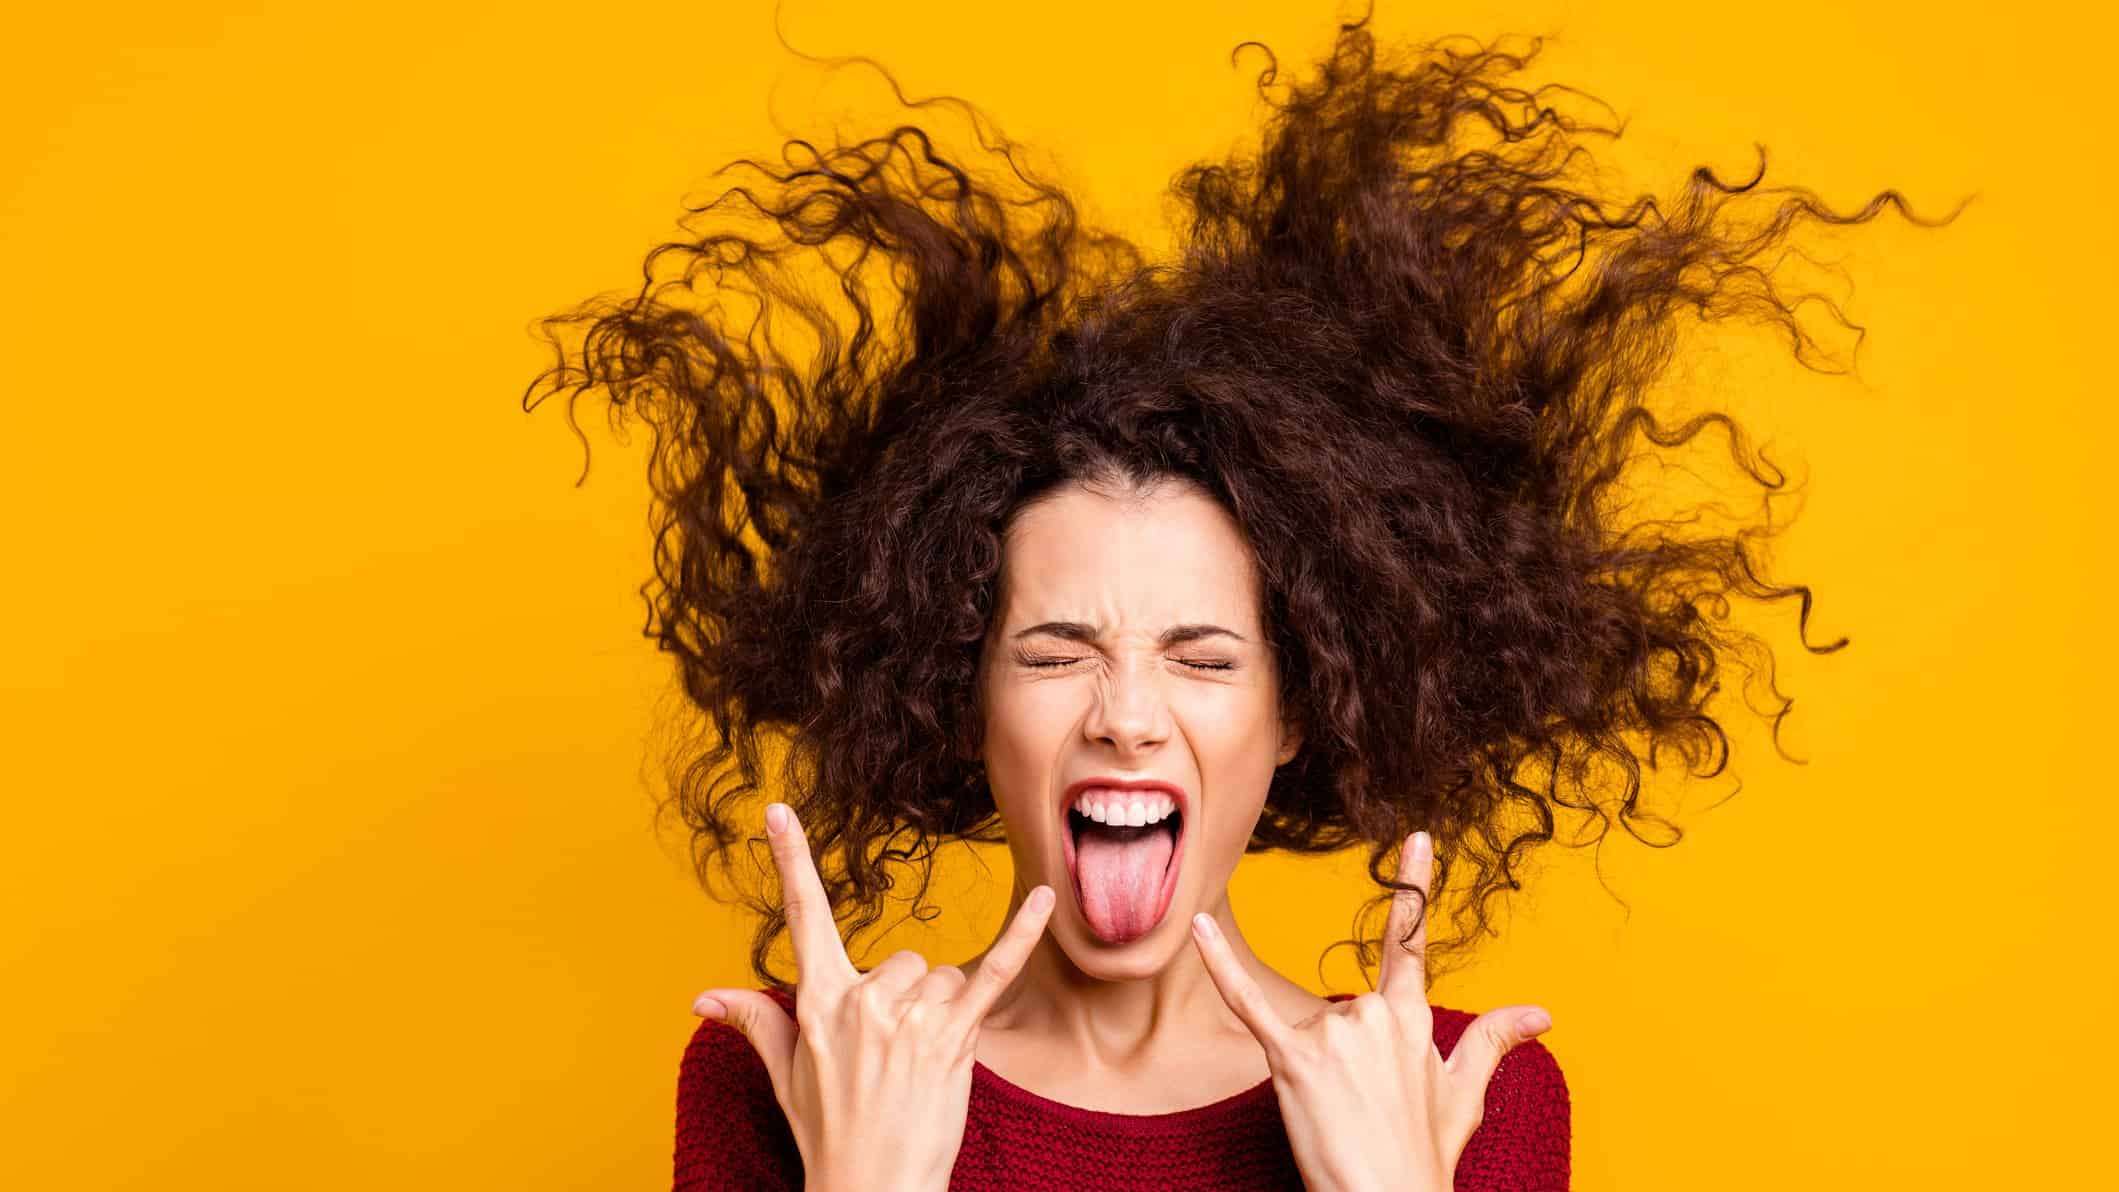 A woman pulls devil rock'n'roll hands and sticks her tongue out whilst headbanging, she's rocking it.